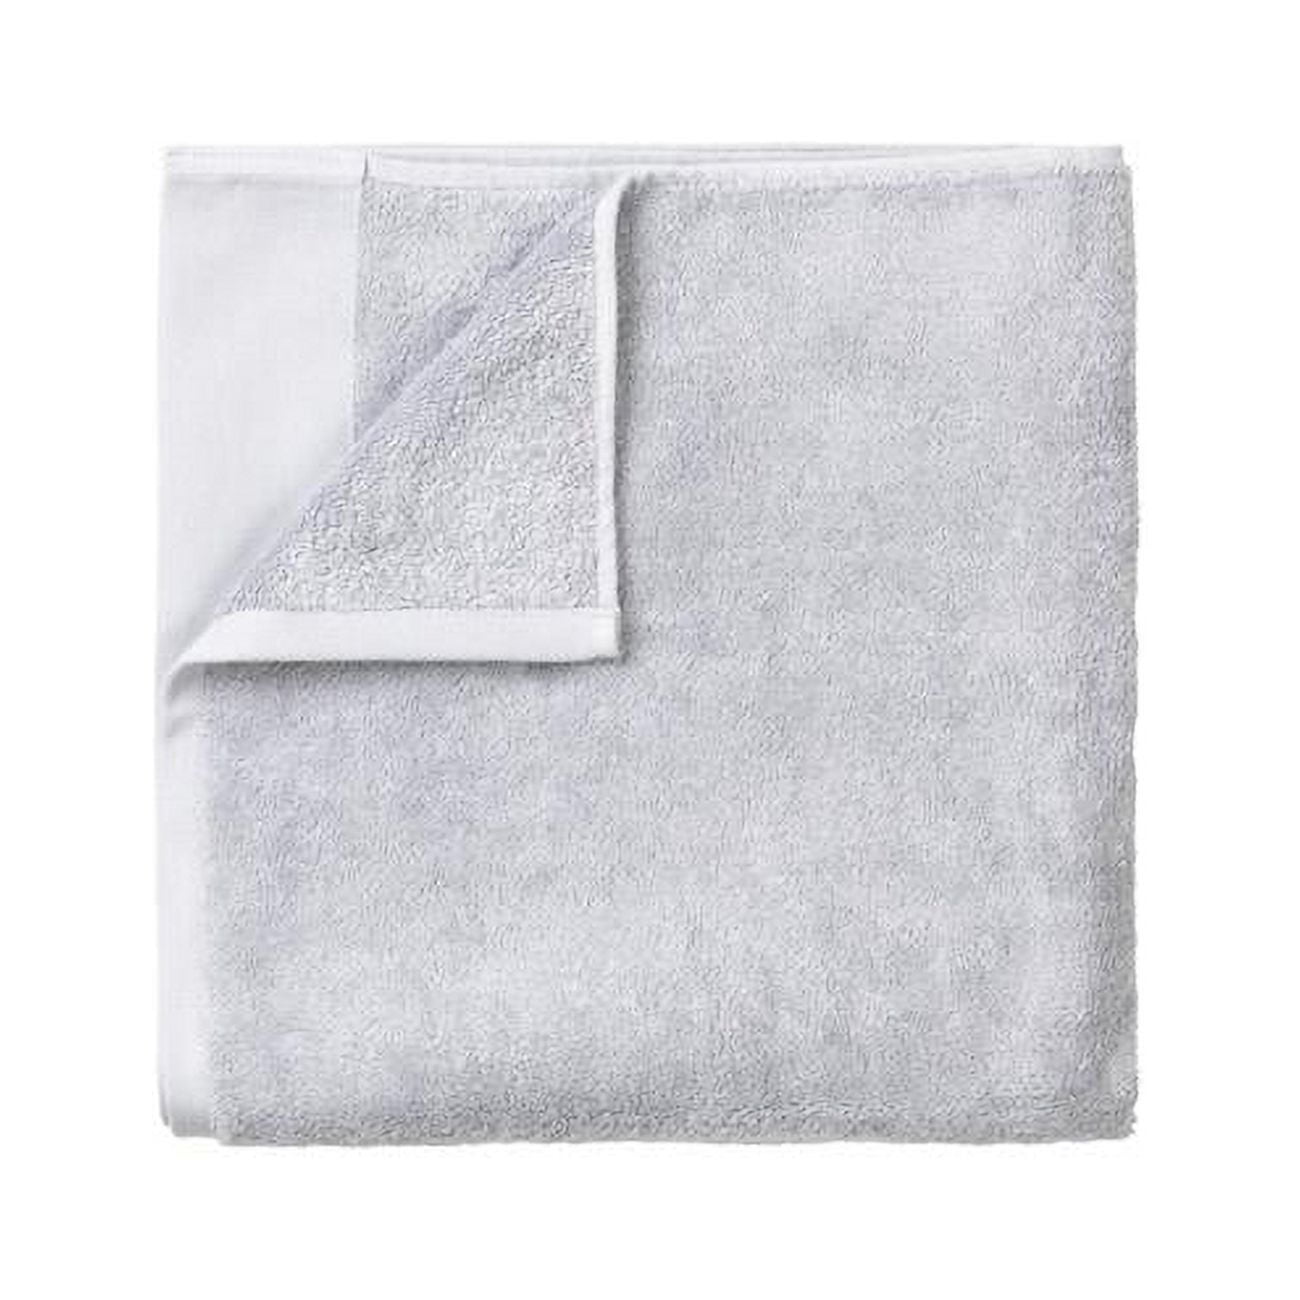 69127 20 X 39 In. Riva Organic Terry Cloth Hand Towel, Microchip - Extra Large